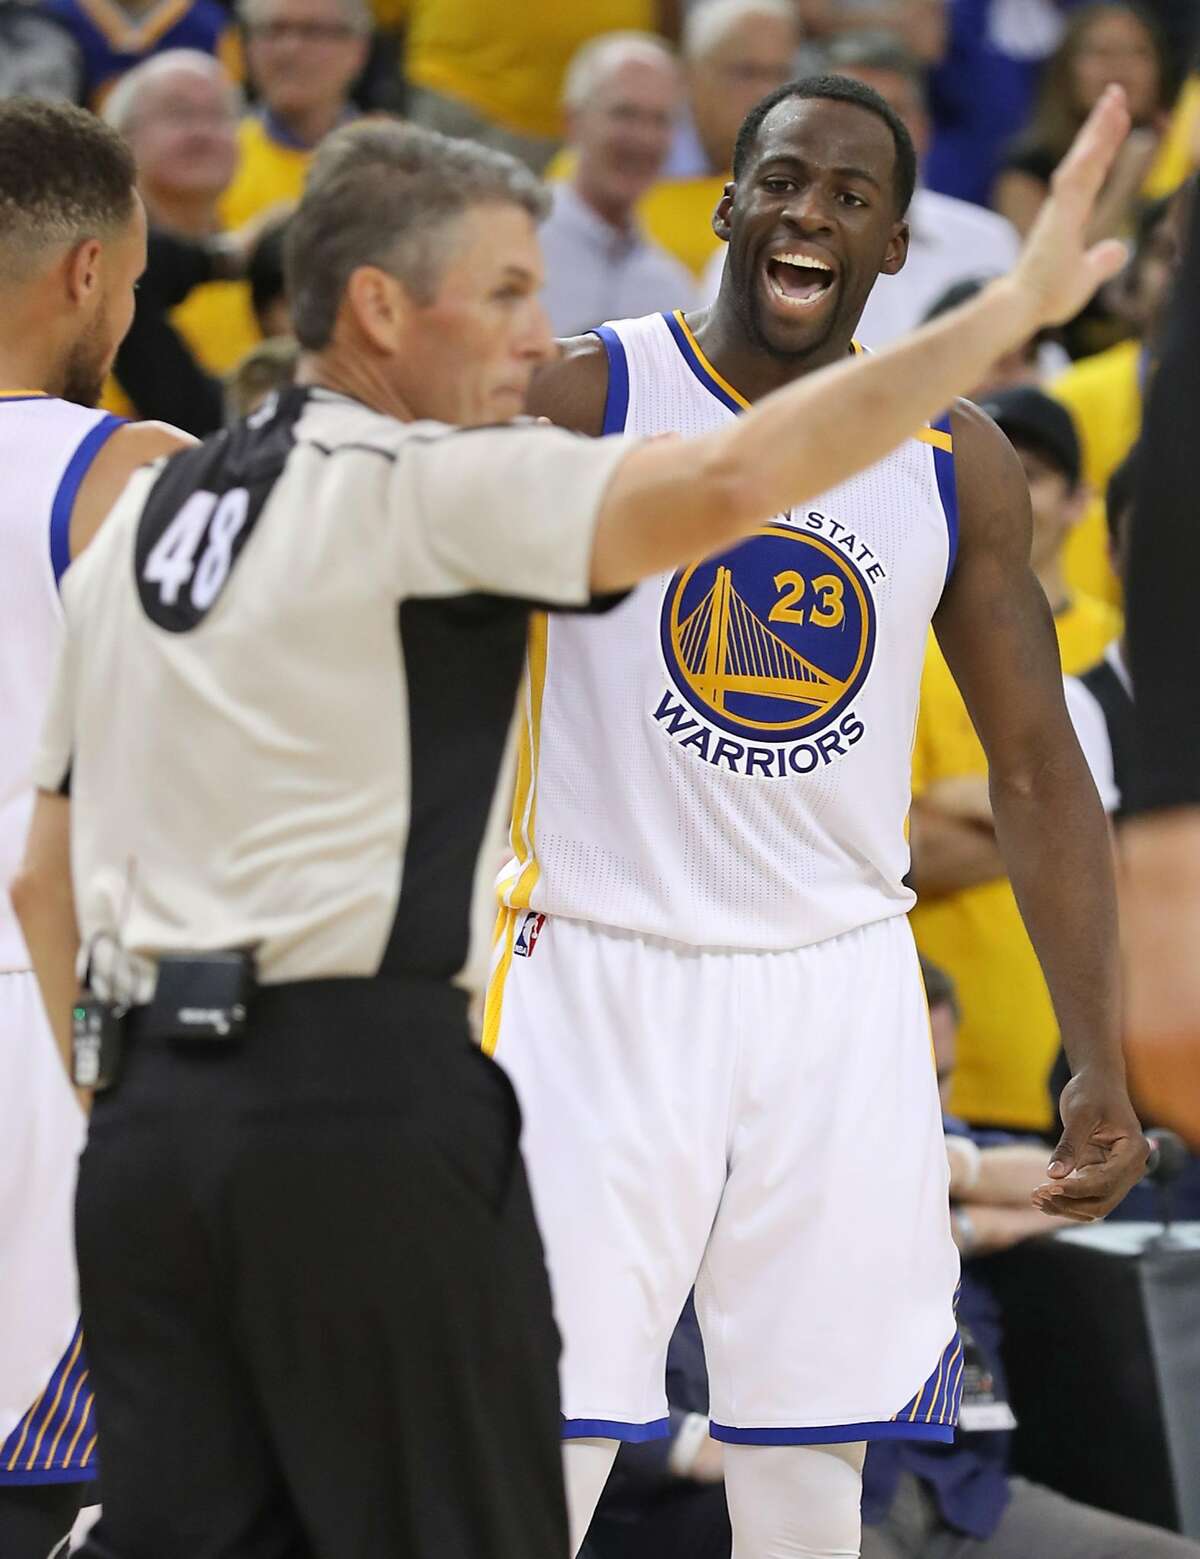 Golden State Warriors' Draymond Green argues a foul call while playing Cleveland Cavaliers in 3rd quarter of Warriors' 132-113 win in Game 2 of NBA Finals at Oracle Arena in Oakland, Calif., on Sunday, June 4, 2017.